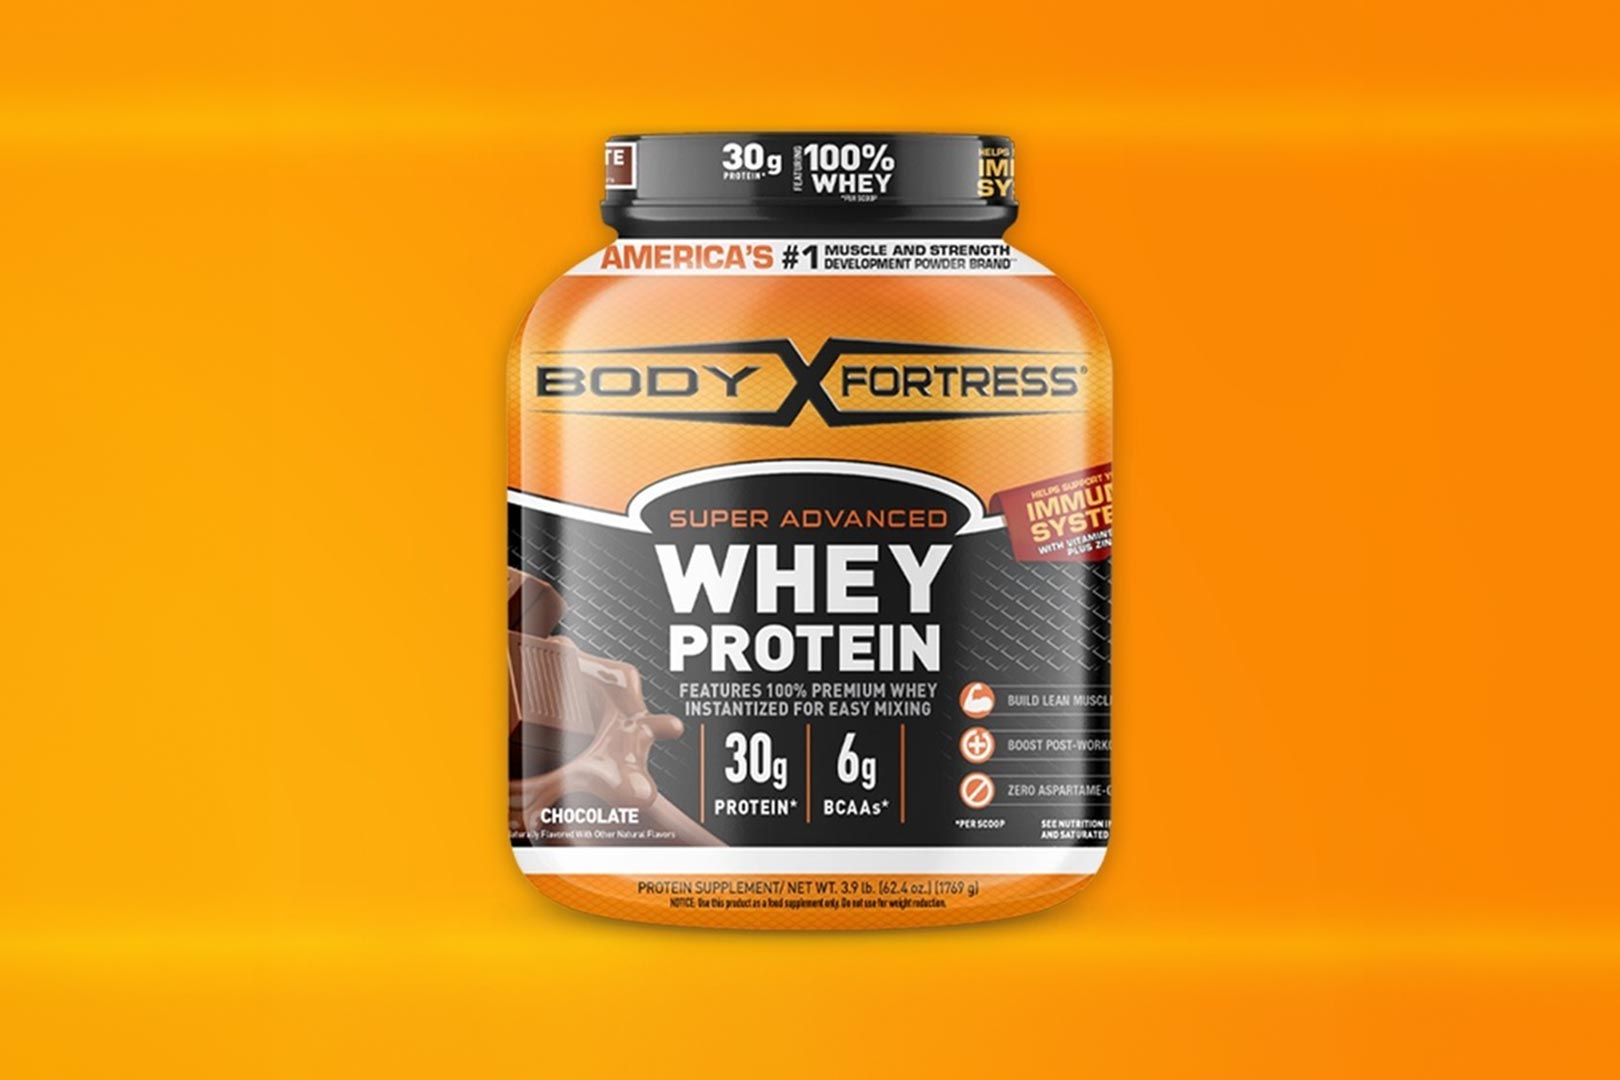 Body Fortress Larger Super Advanced Whey Protein